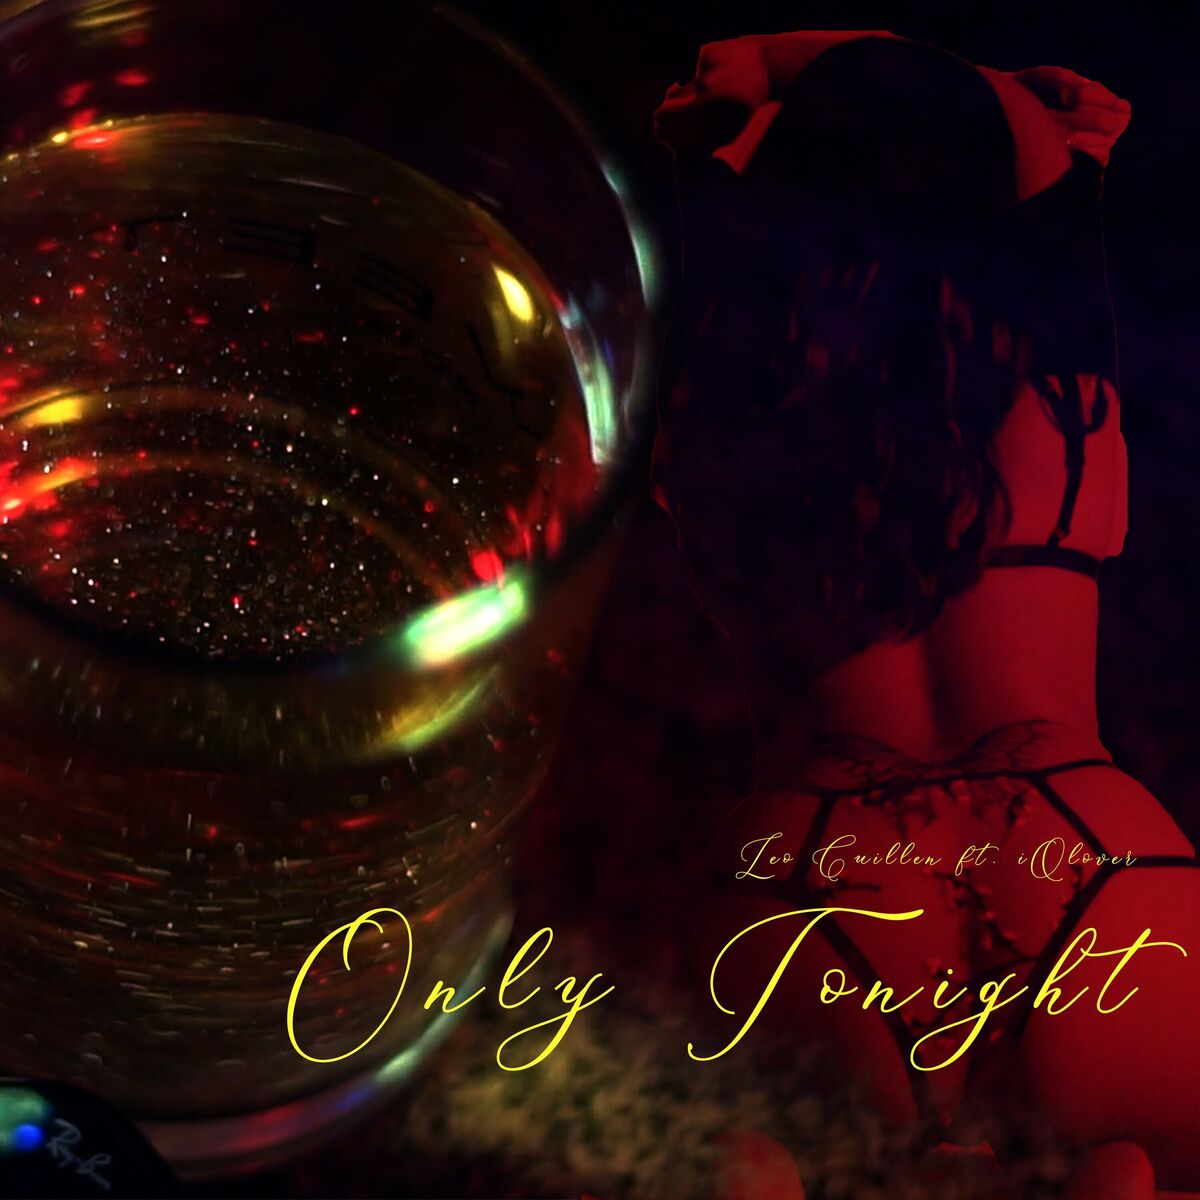 Only Tonight: Leo Guillen, iQlover – Only Tonight